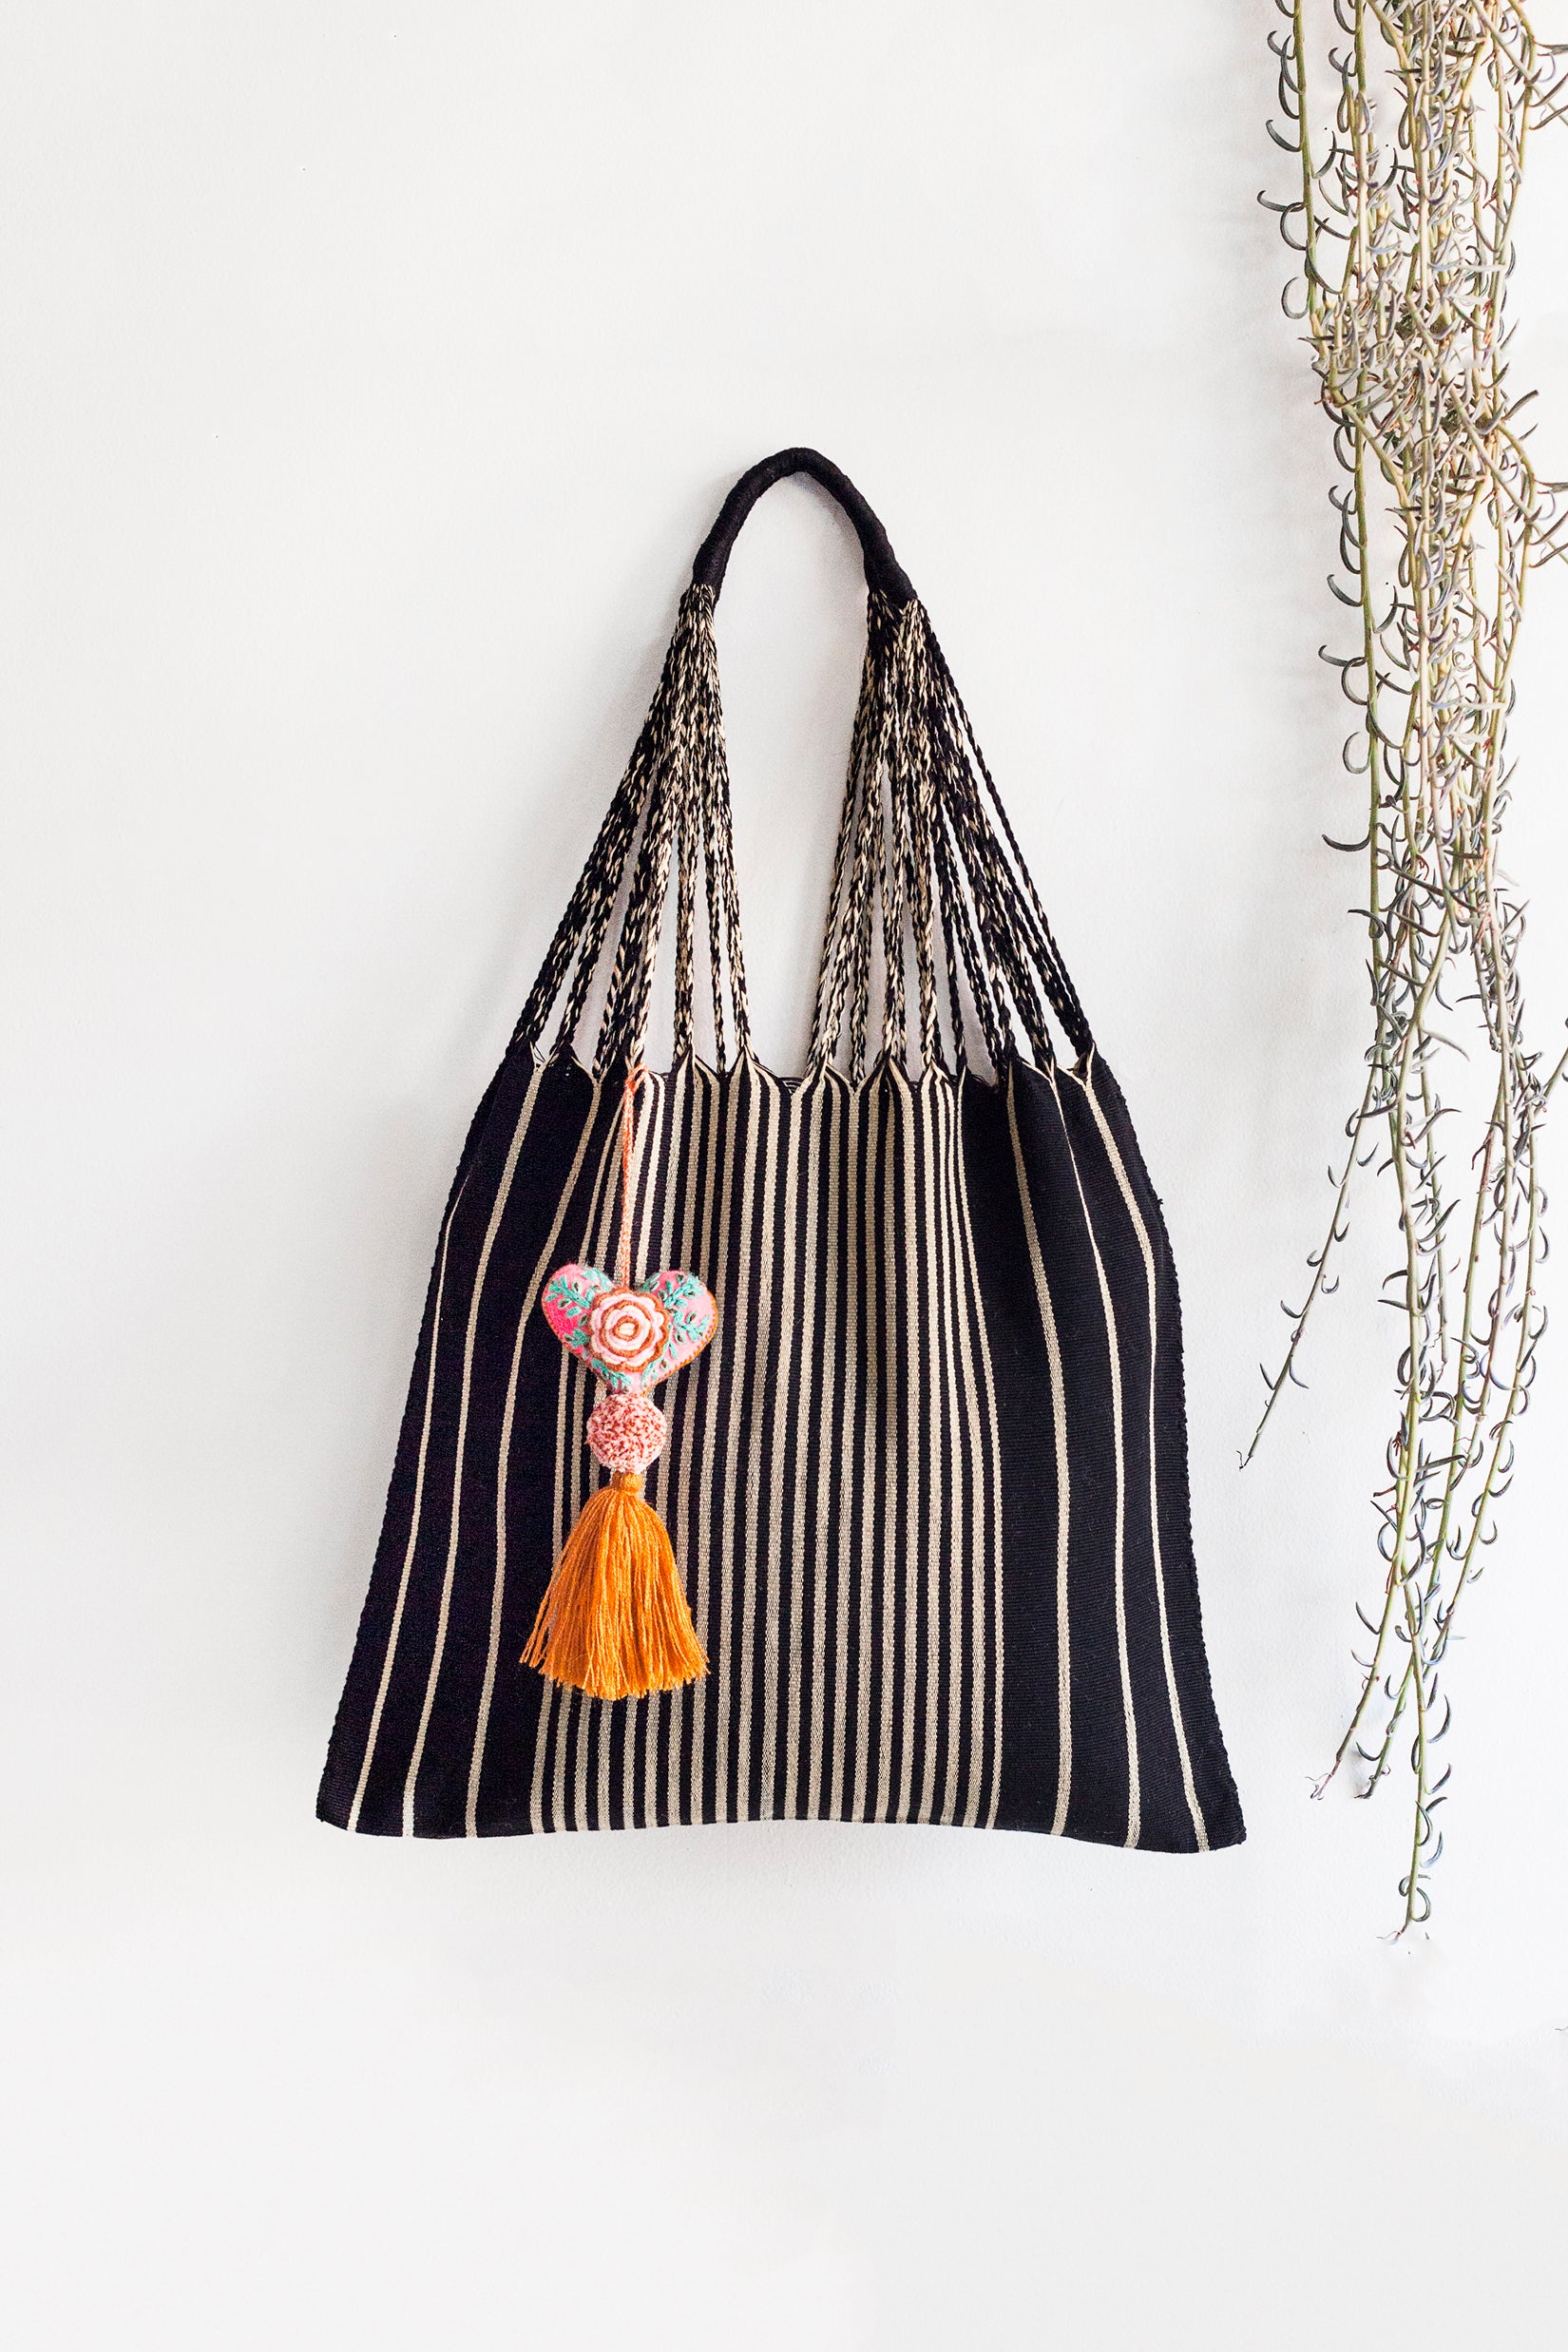 Woven black tote bag with vertical cream stripes and black and off-white braided straps attached to a curved black handle.